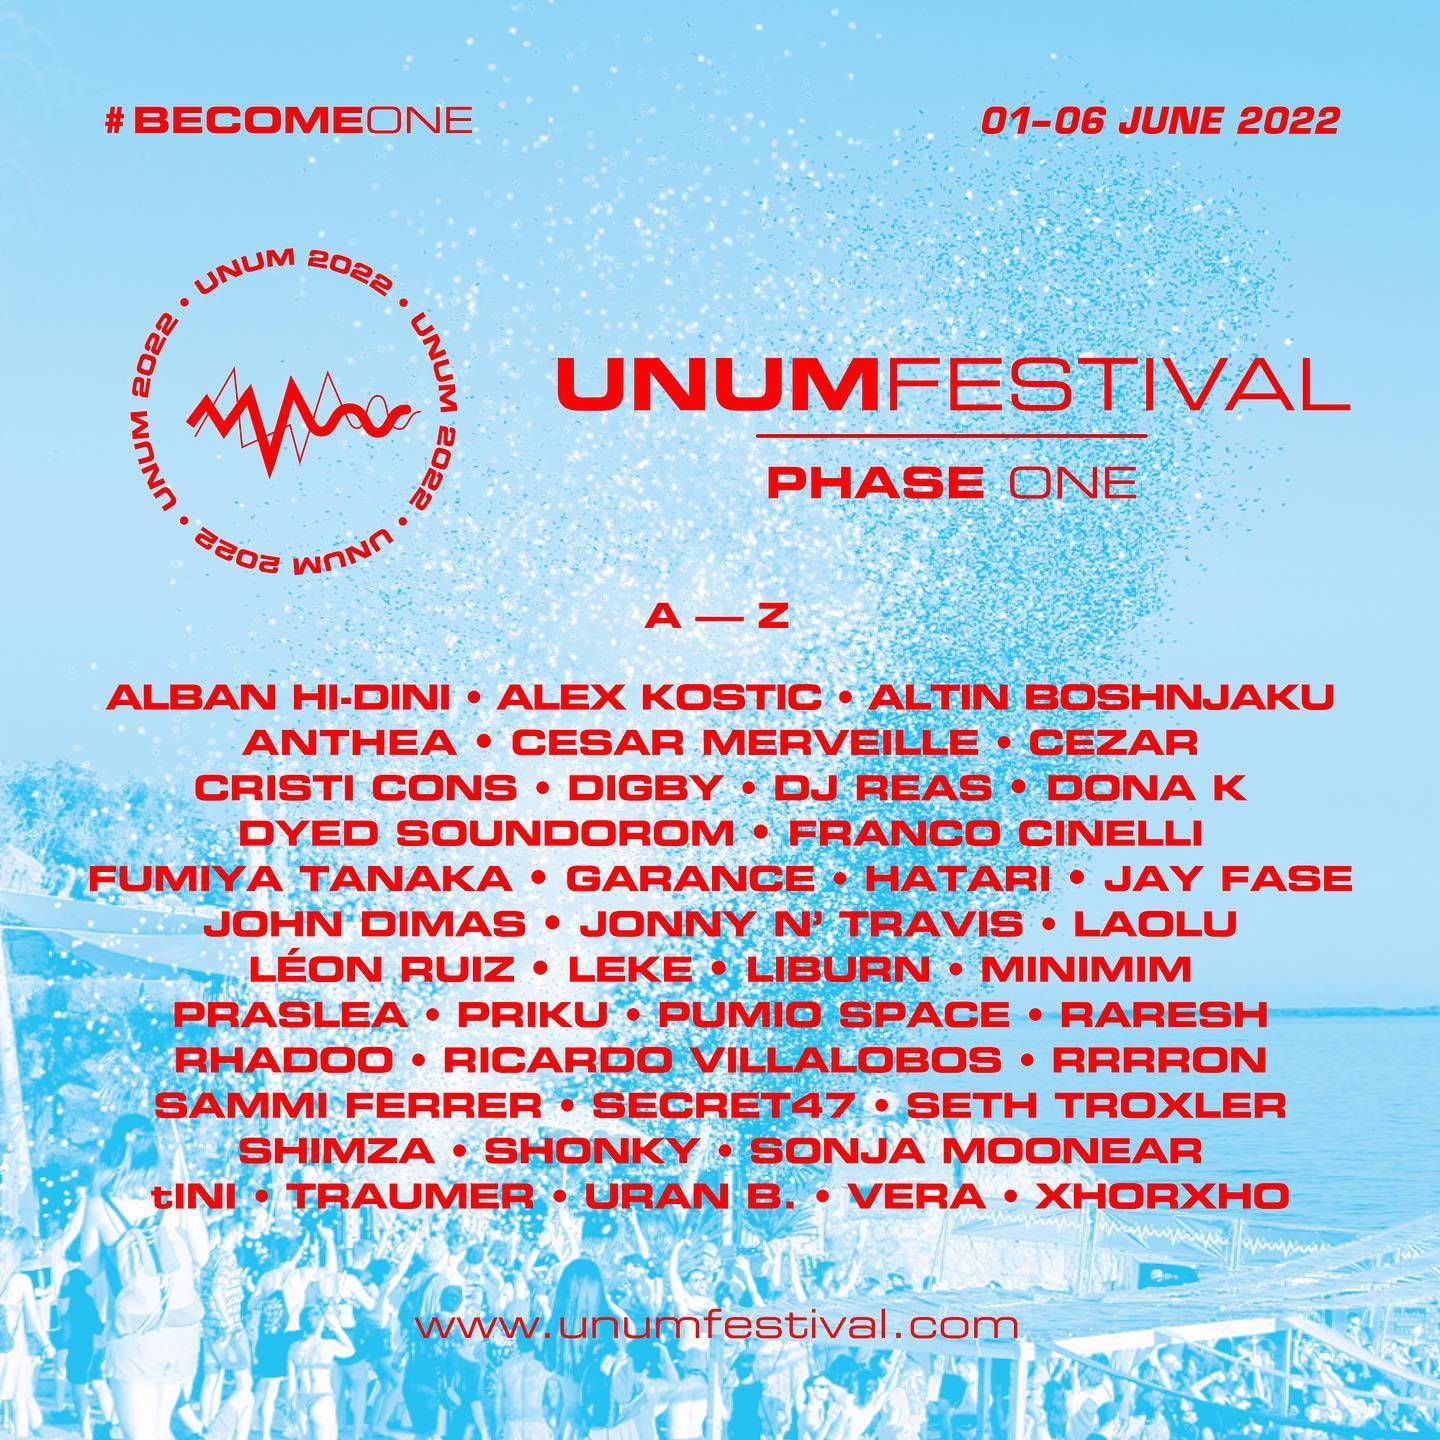 The dates and first wave of headliners for the 2022 edition of UNUM Festival have been announced